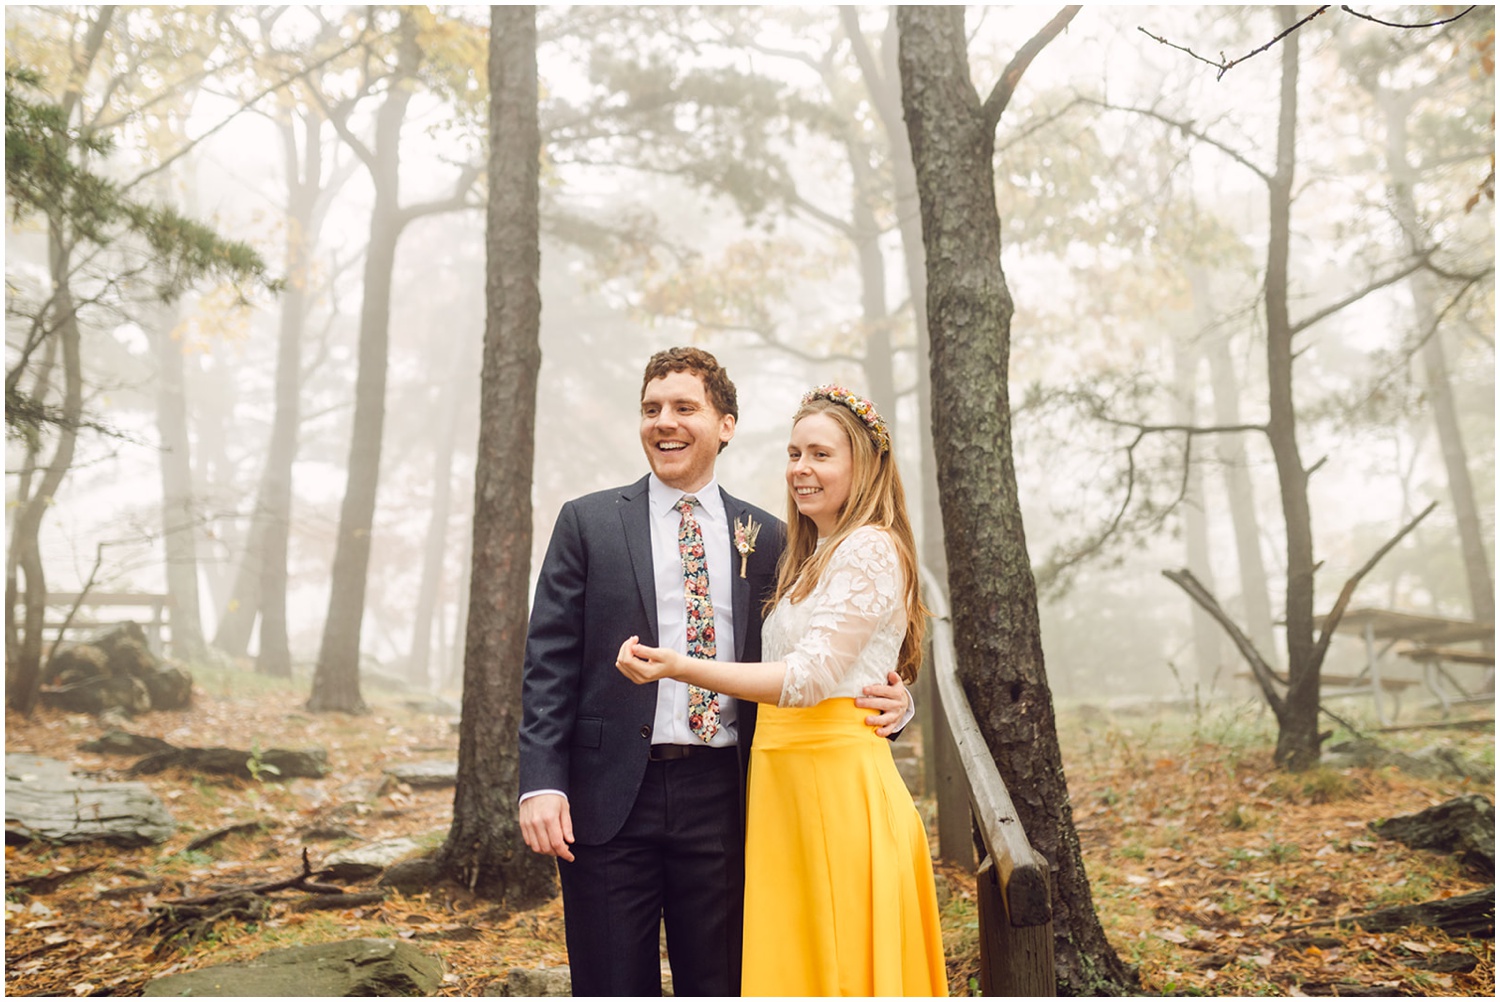 A bride and groom stand smiling in the woods after their Quaker wedding.